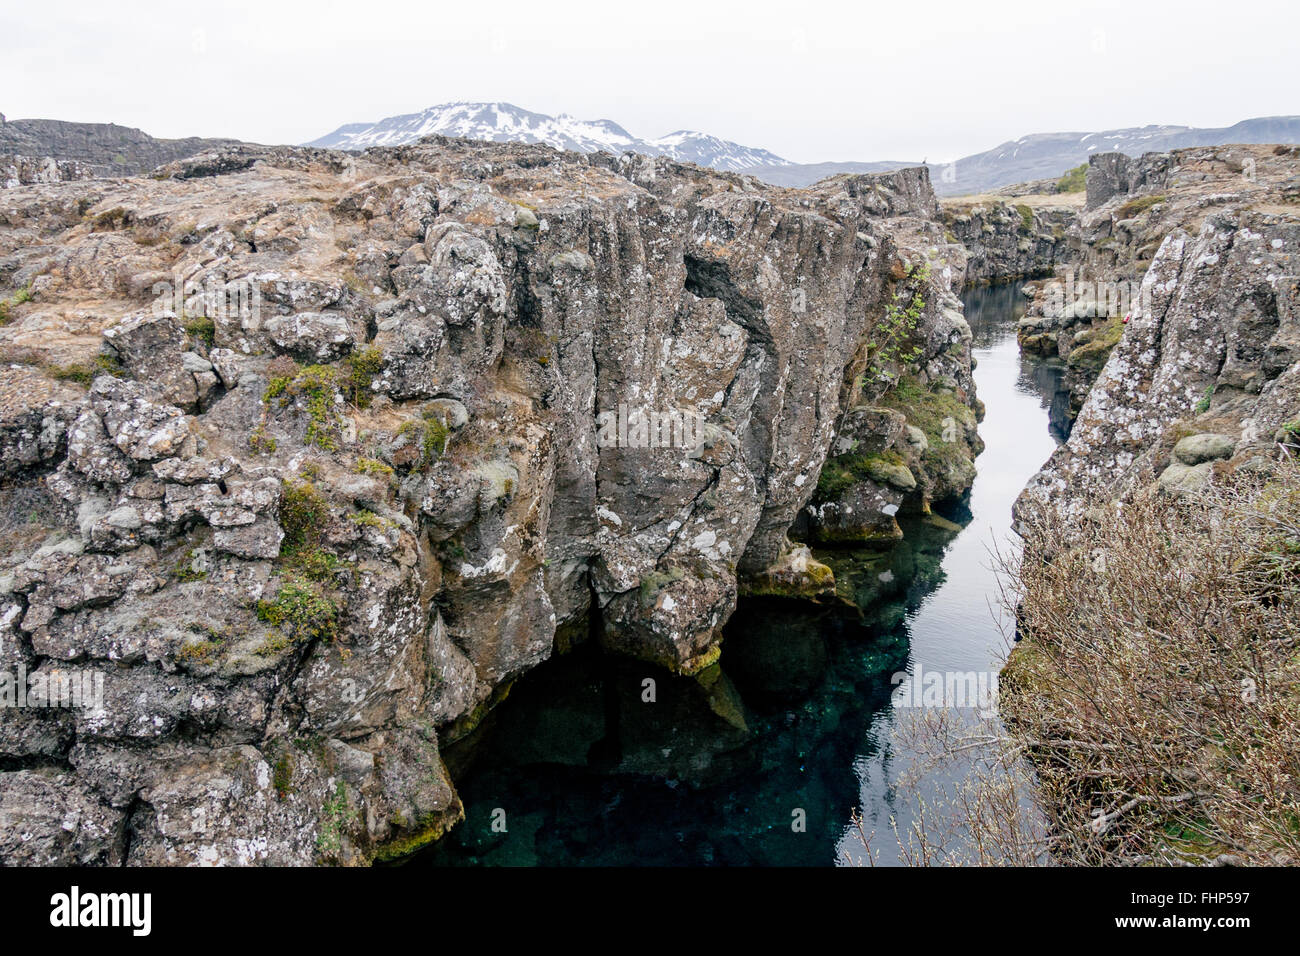 A crevice that separates two continental plates at Thingvellir National Park in Iceland. A popular tourist destination. Stock Photo